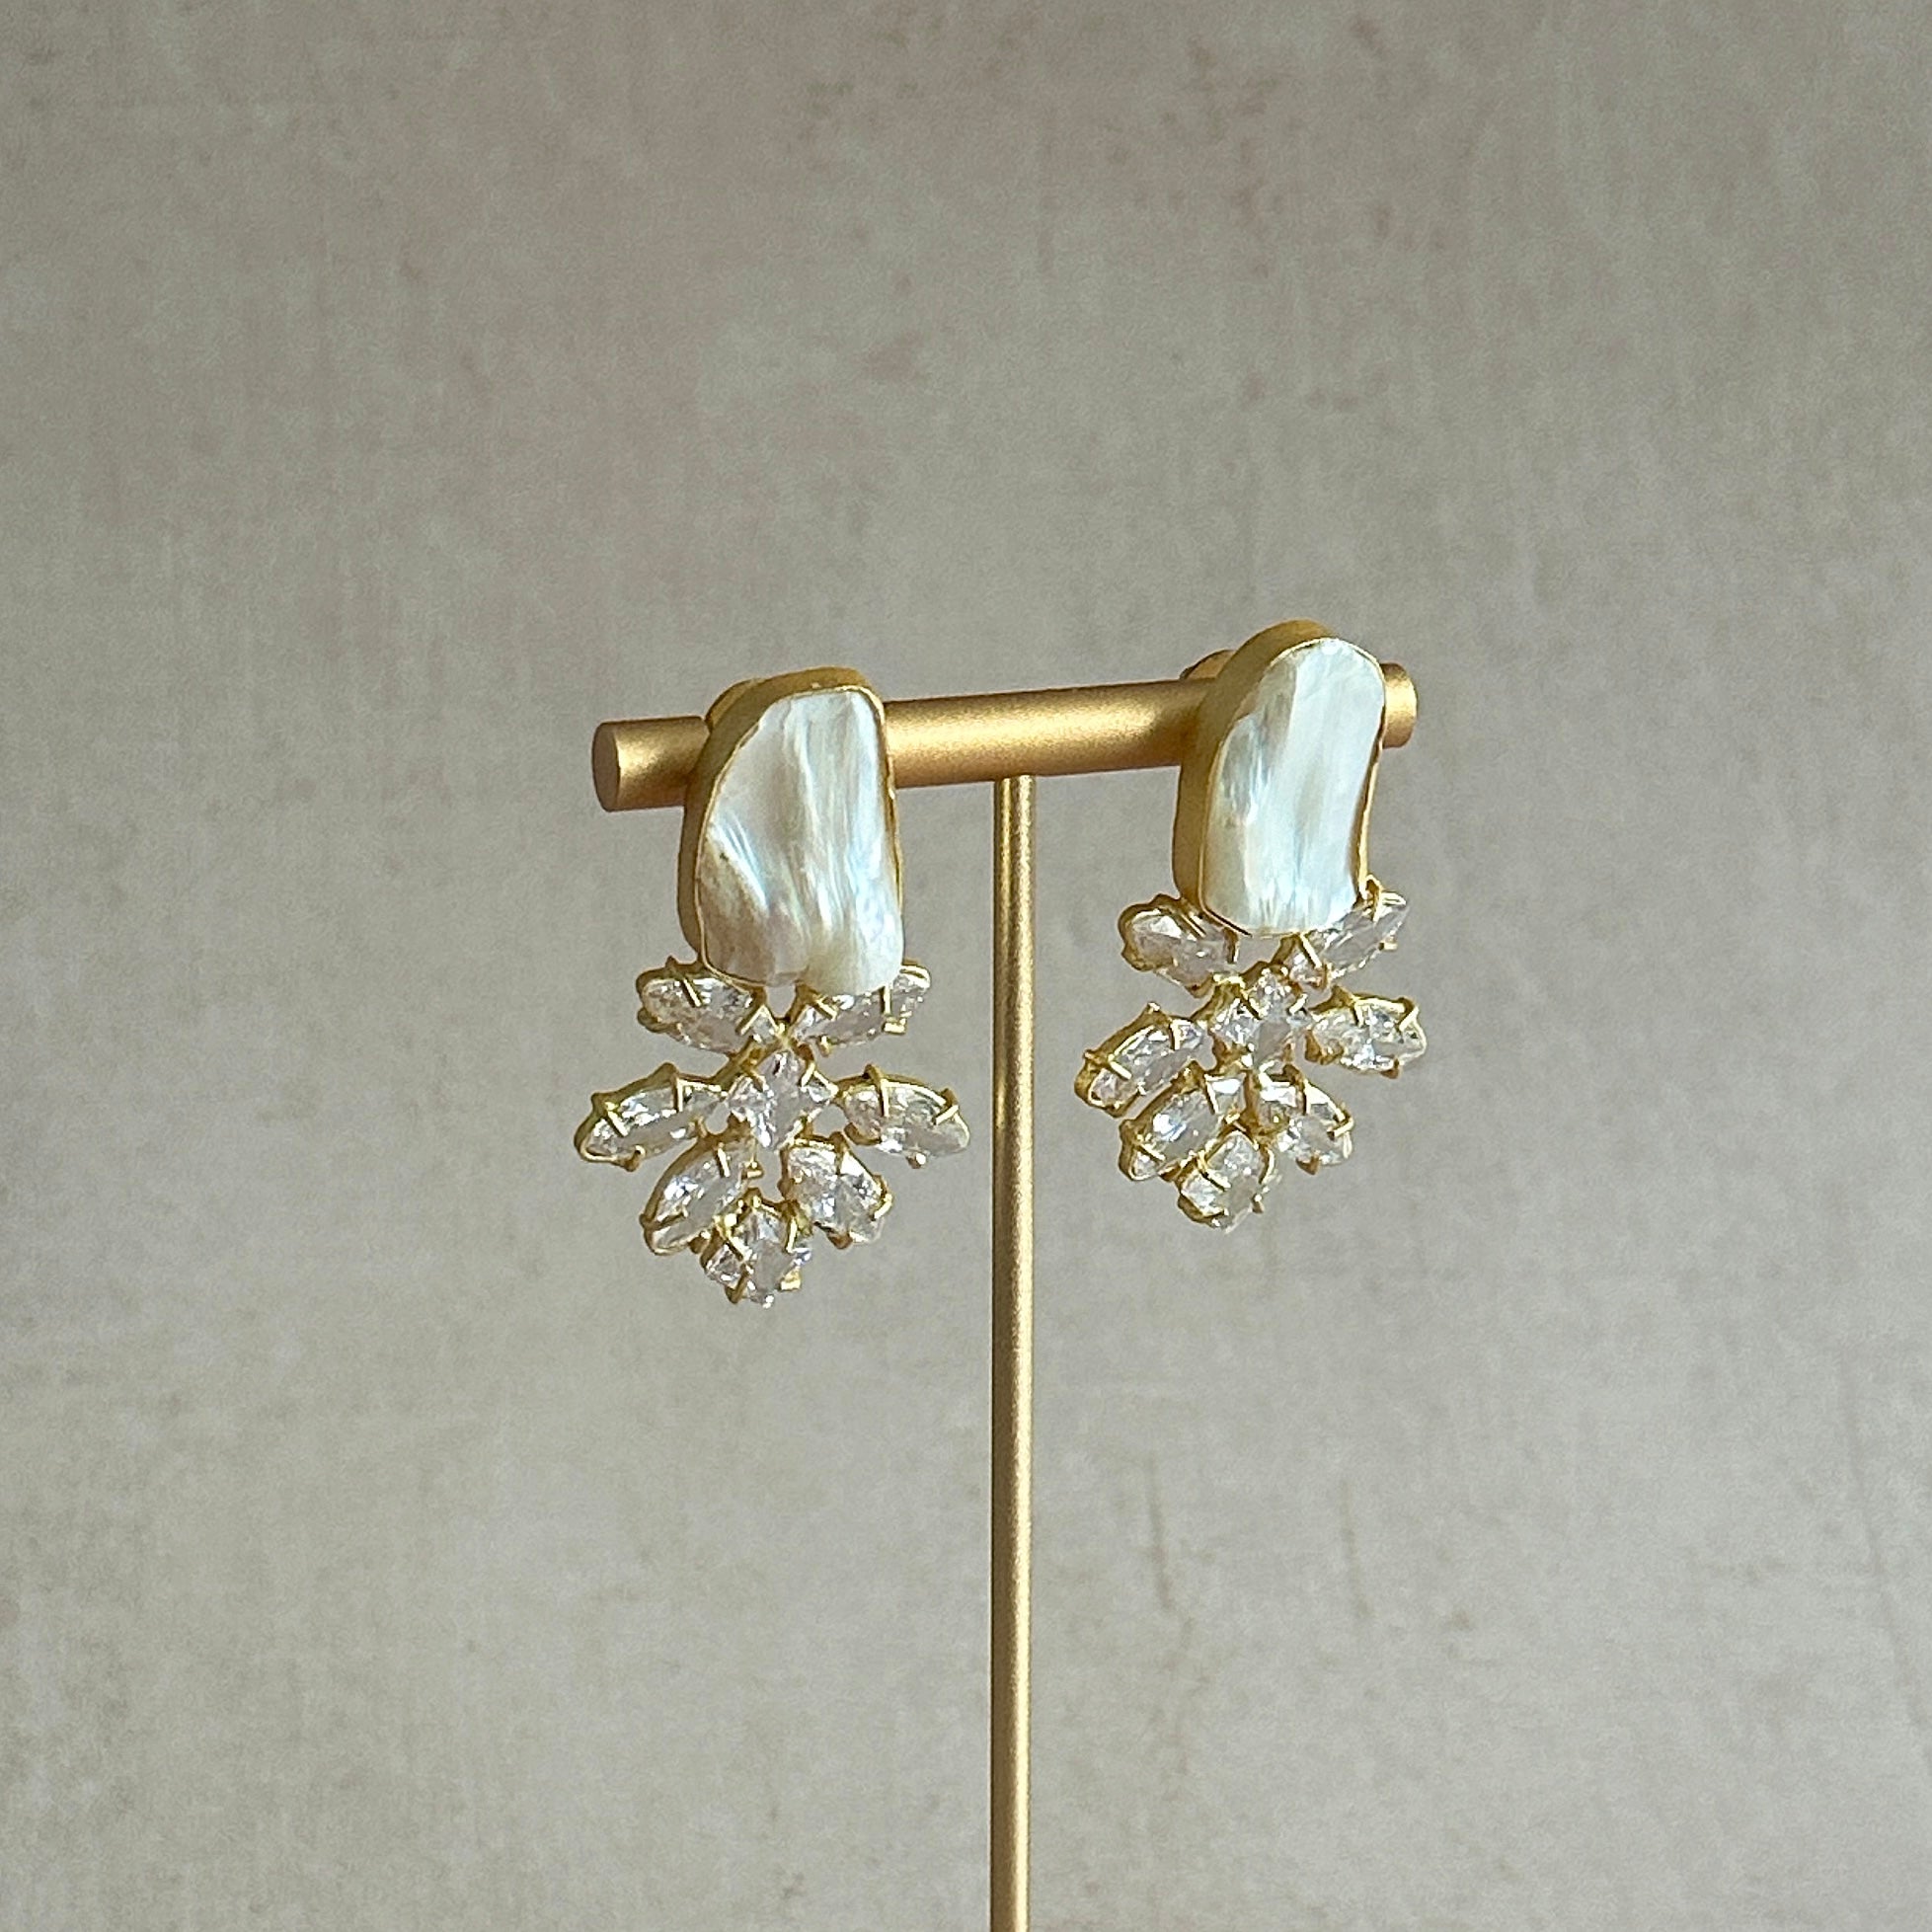 Elevate your accessory game with our Baroque Pearl Crystal Stud Earrings! These stunning studs feature naturally formed baroque pearls, each with a distinctive shape and texture. To add a touch of glamour, the CZ crystals will have you sparkling all evening. Bring a touch of elegance to any outfit with these one-of-a-kind earrings.